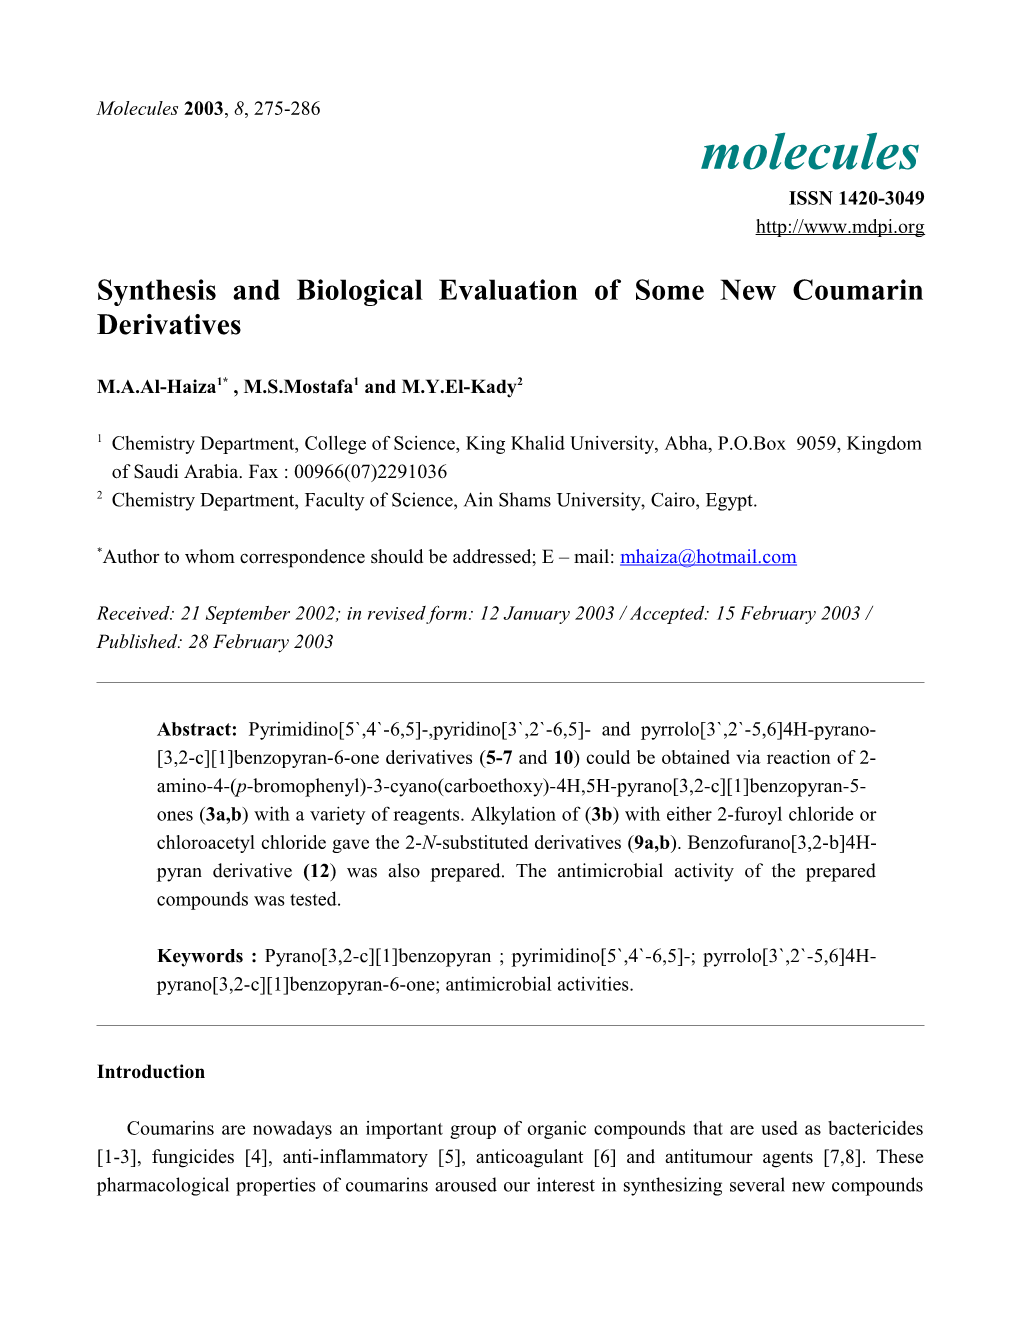 Synthesis and Evaluation of Biological Activity of Some New Coumarin Derivatives